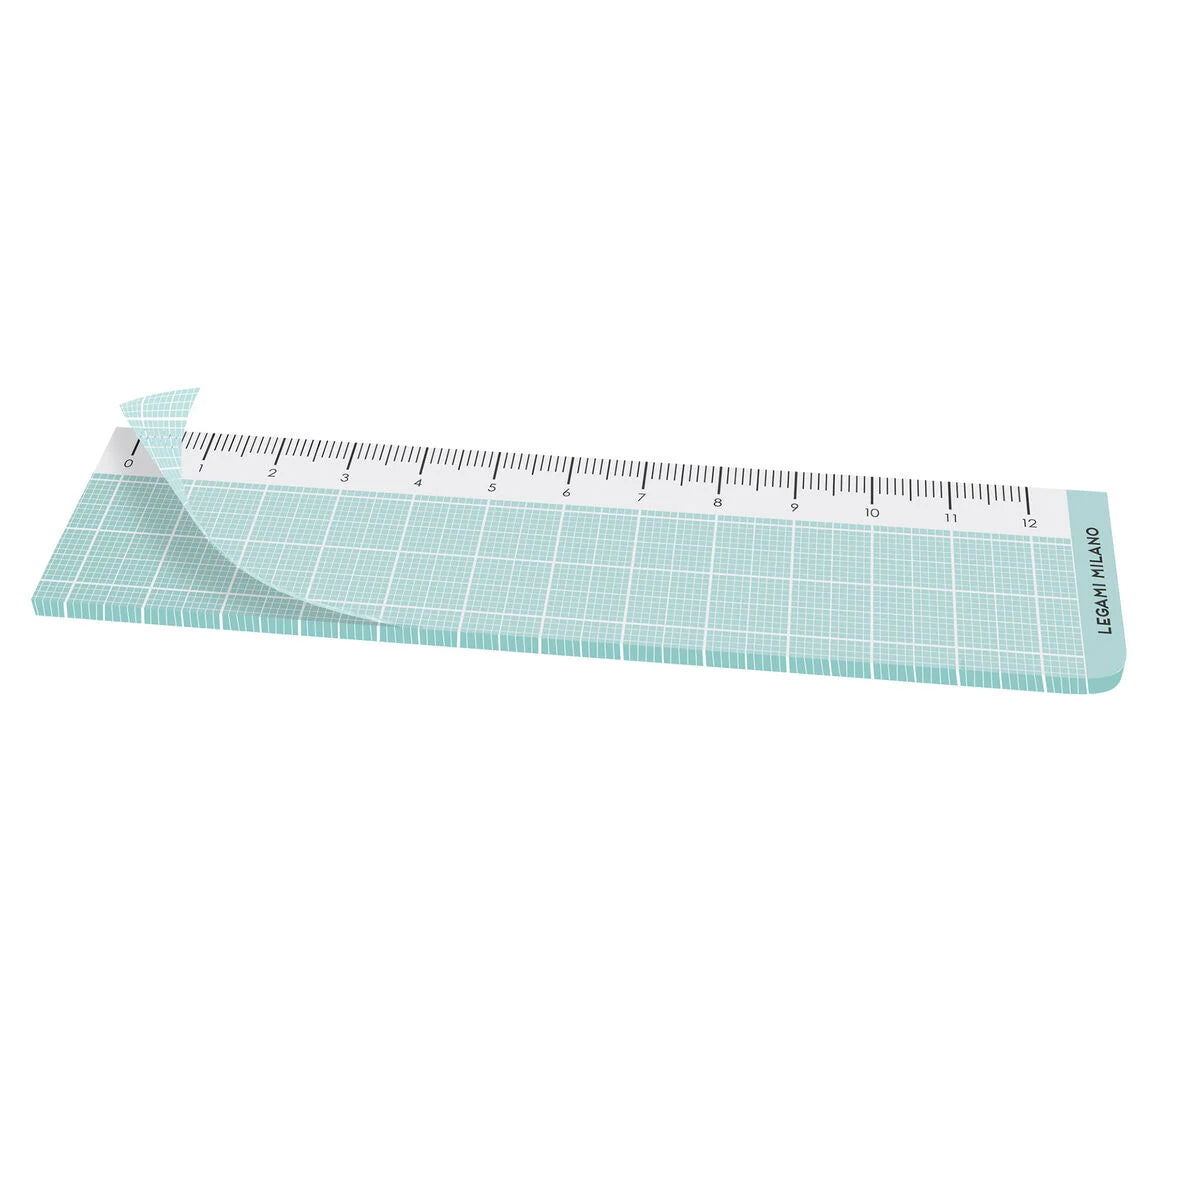 Fab Gifts | Legami Happy Ruler Sticky Notes by Weirs of Baggot Street